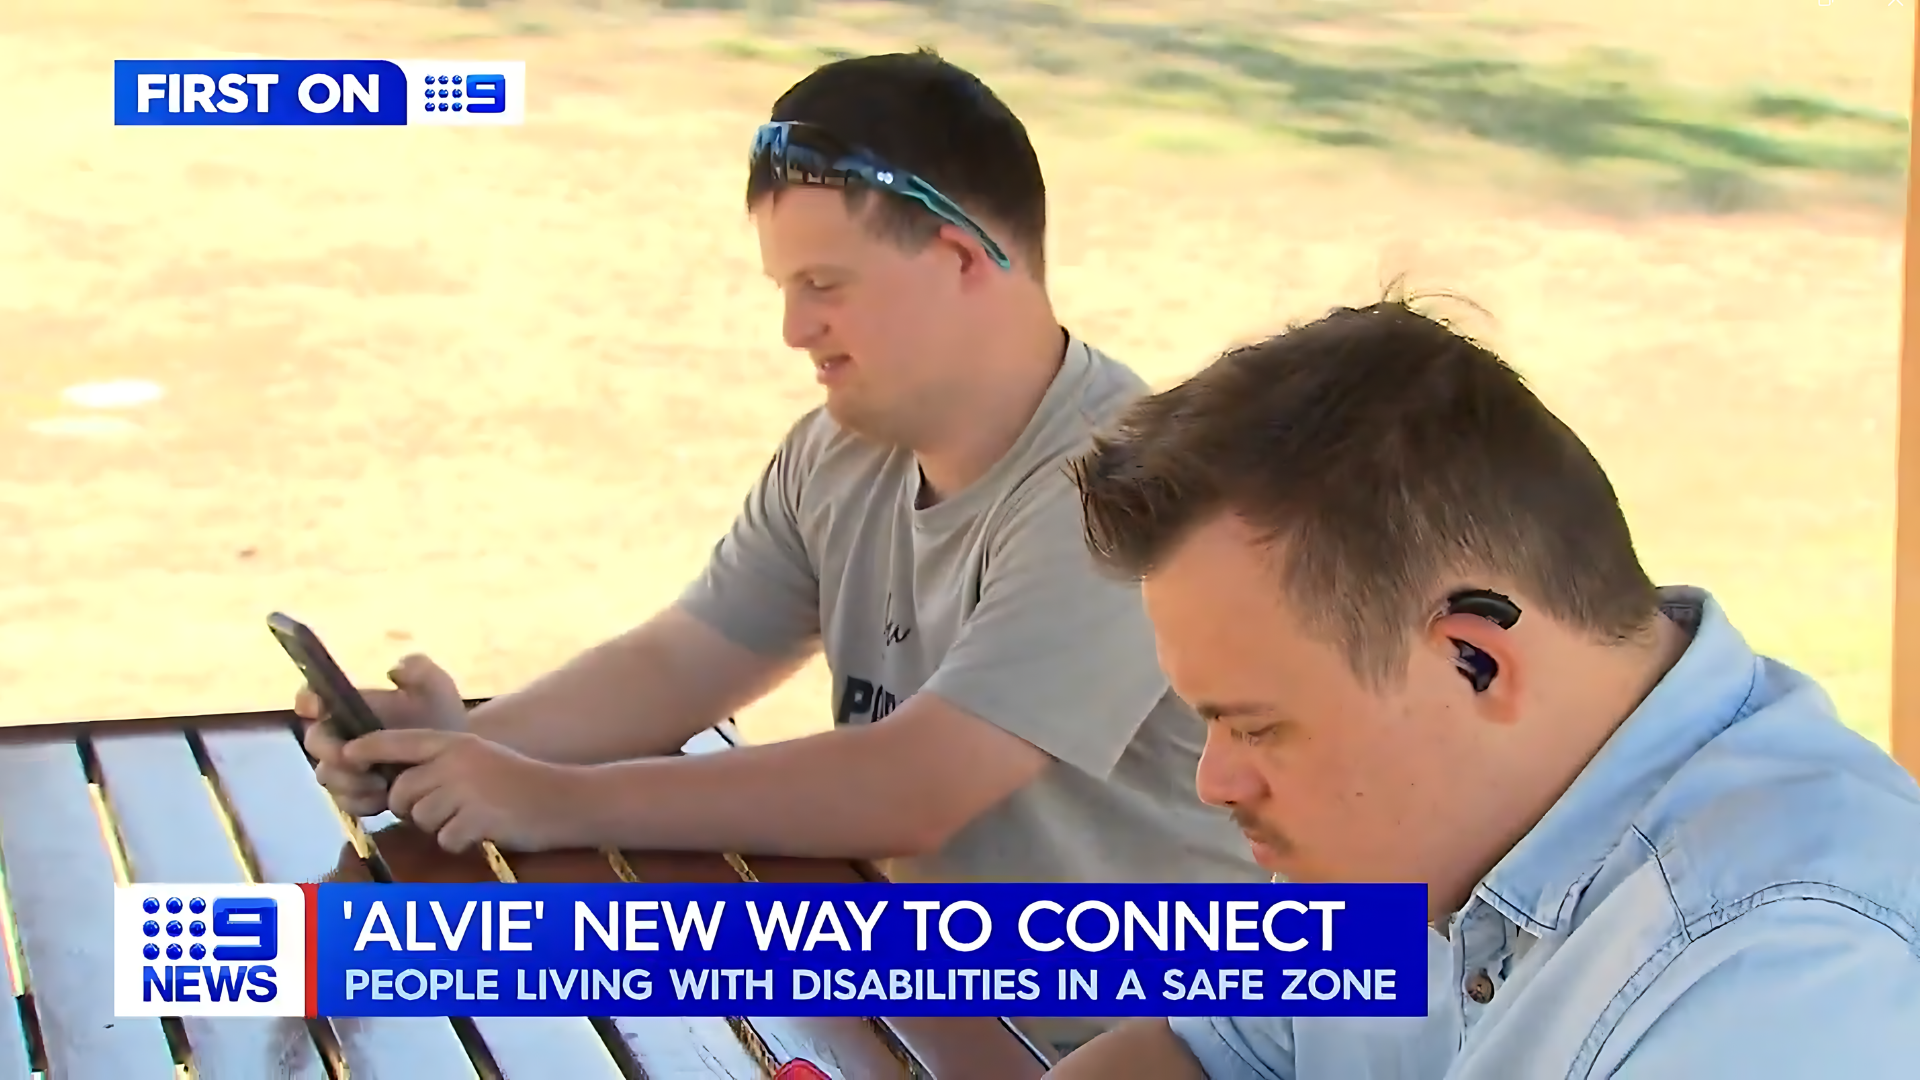 Alvie app on News 9 - People living with disabilities in a safe zone